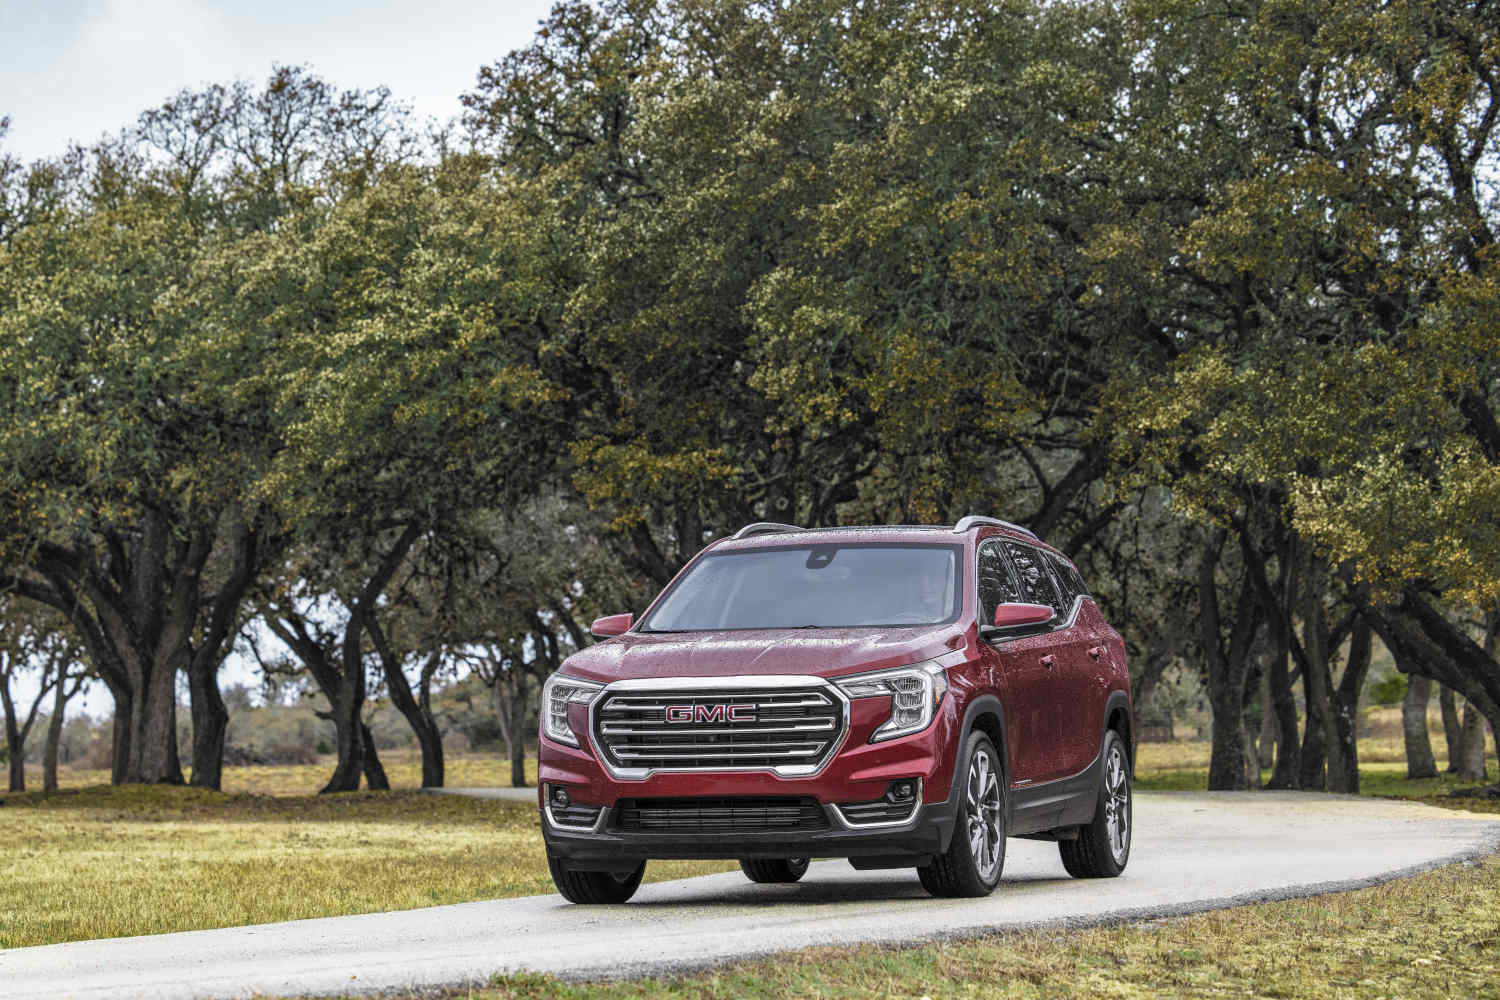 The best compact SUV might not be the GMC Terrain